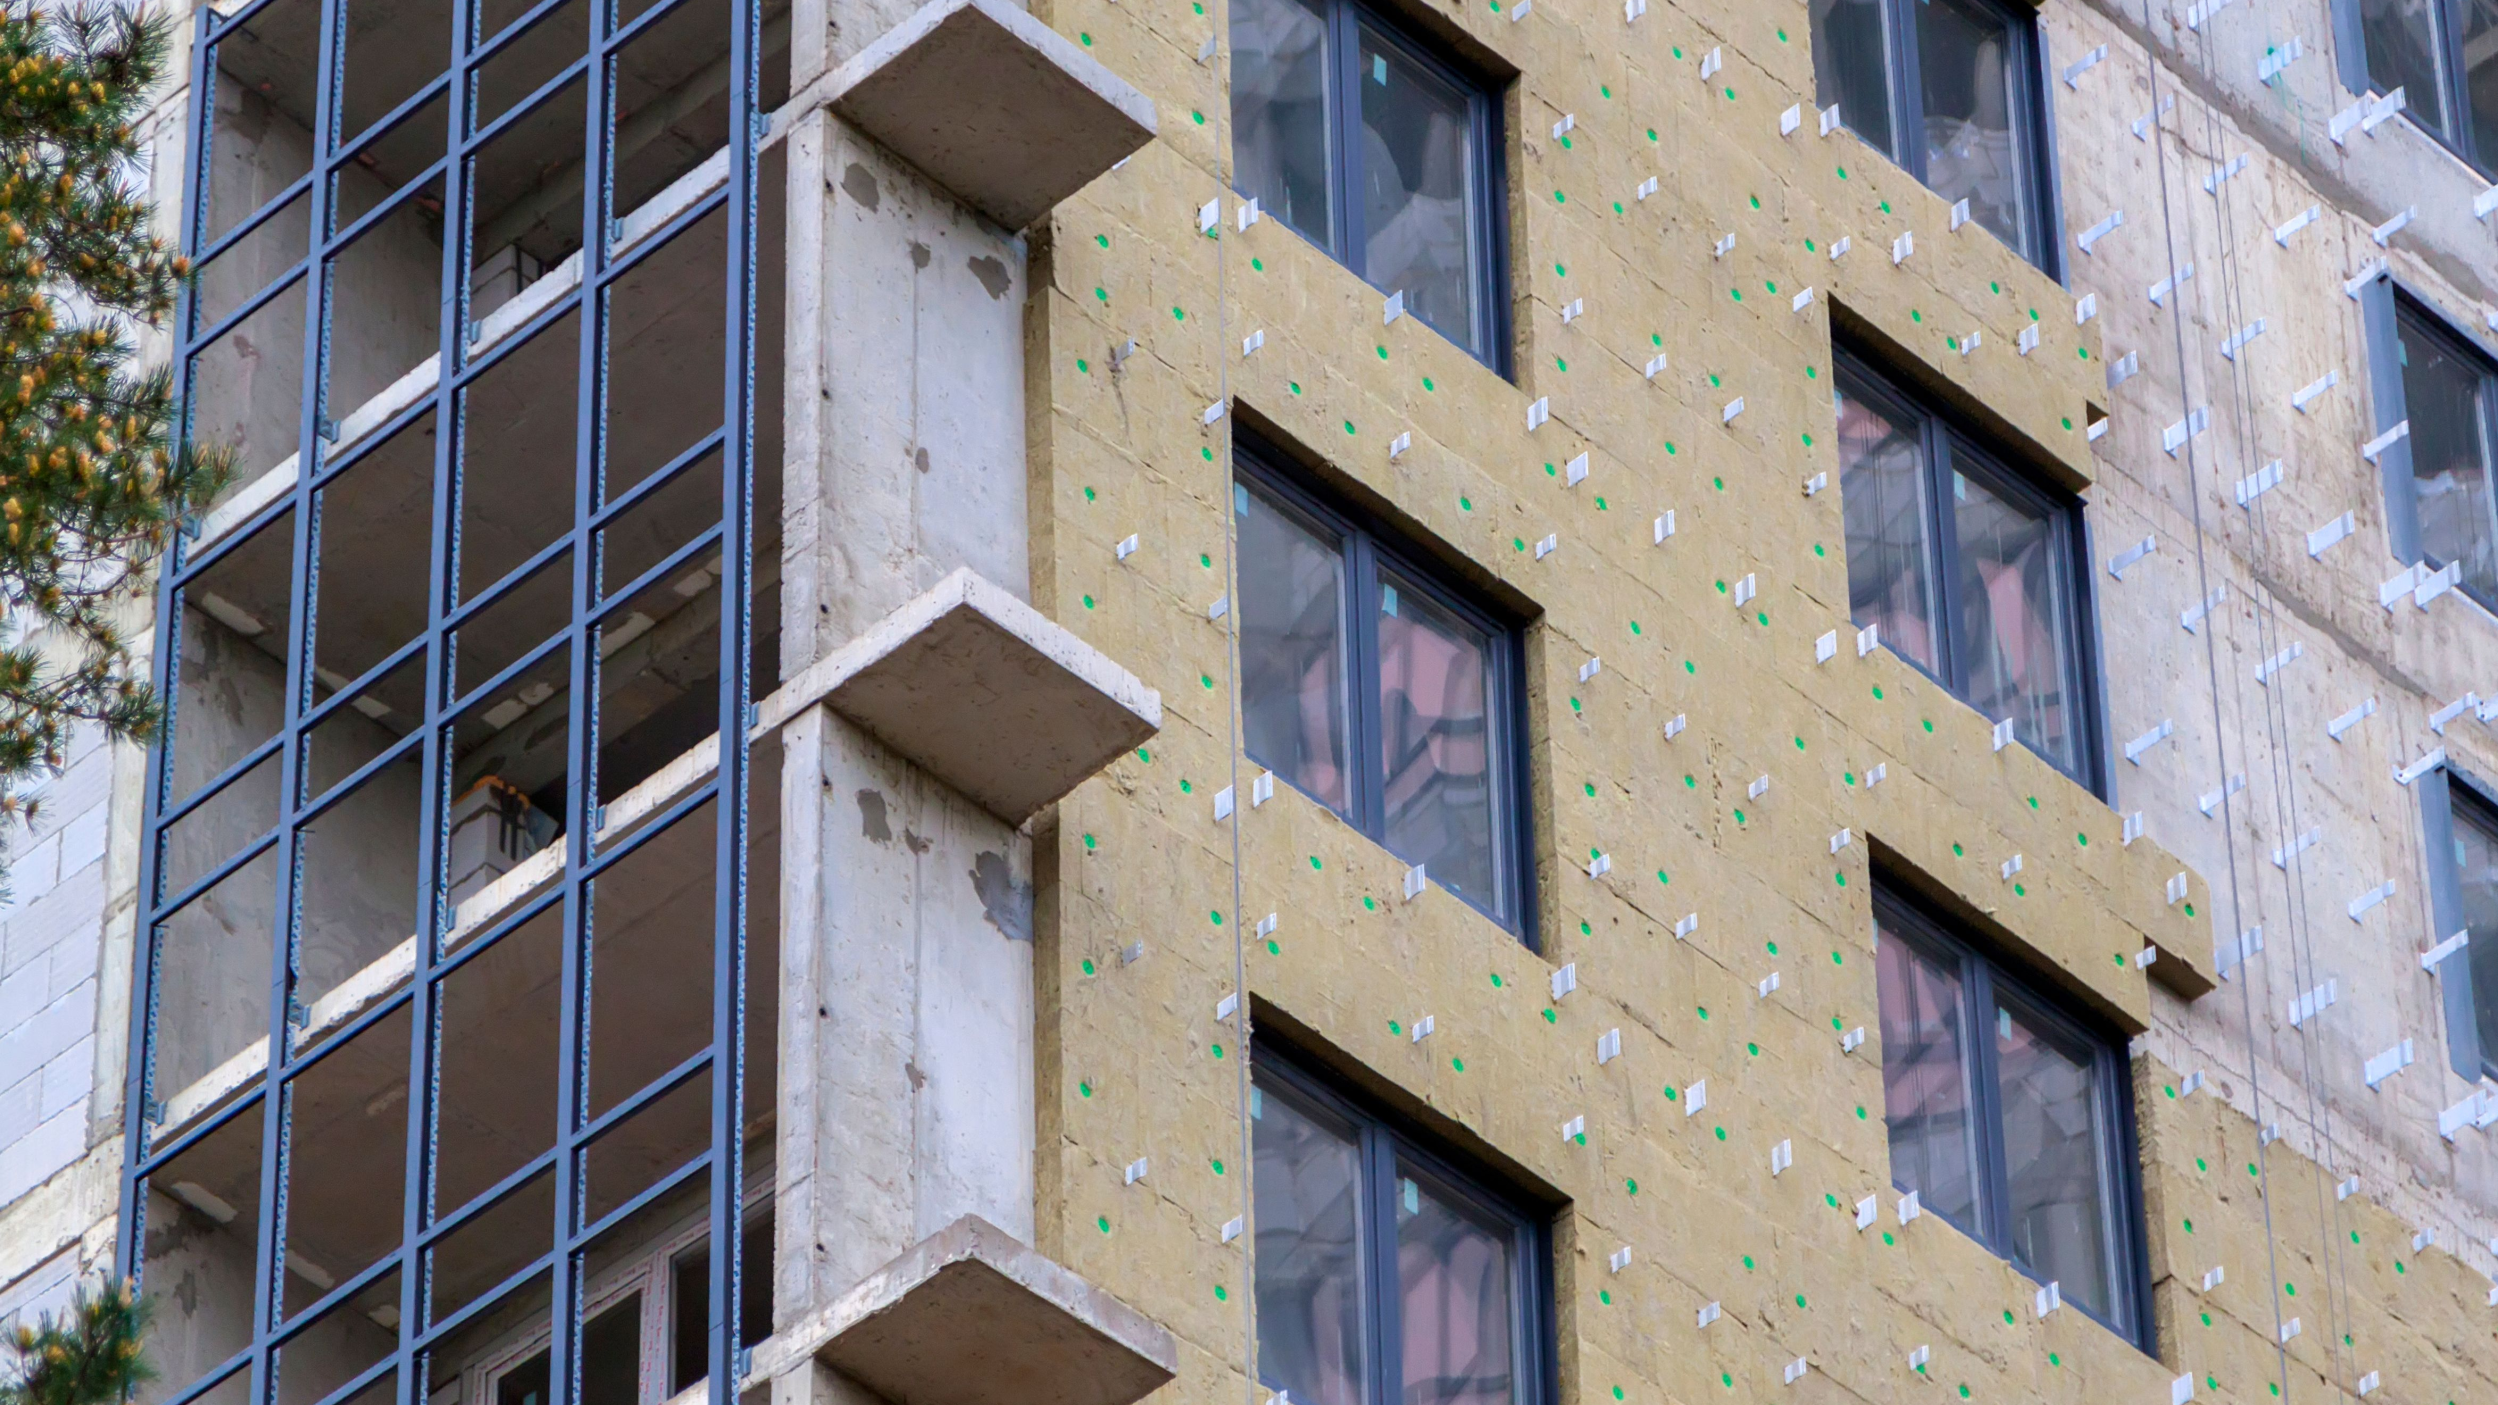 Insulation on outside of high rise in progress